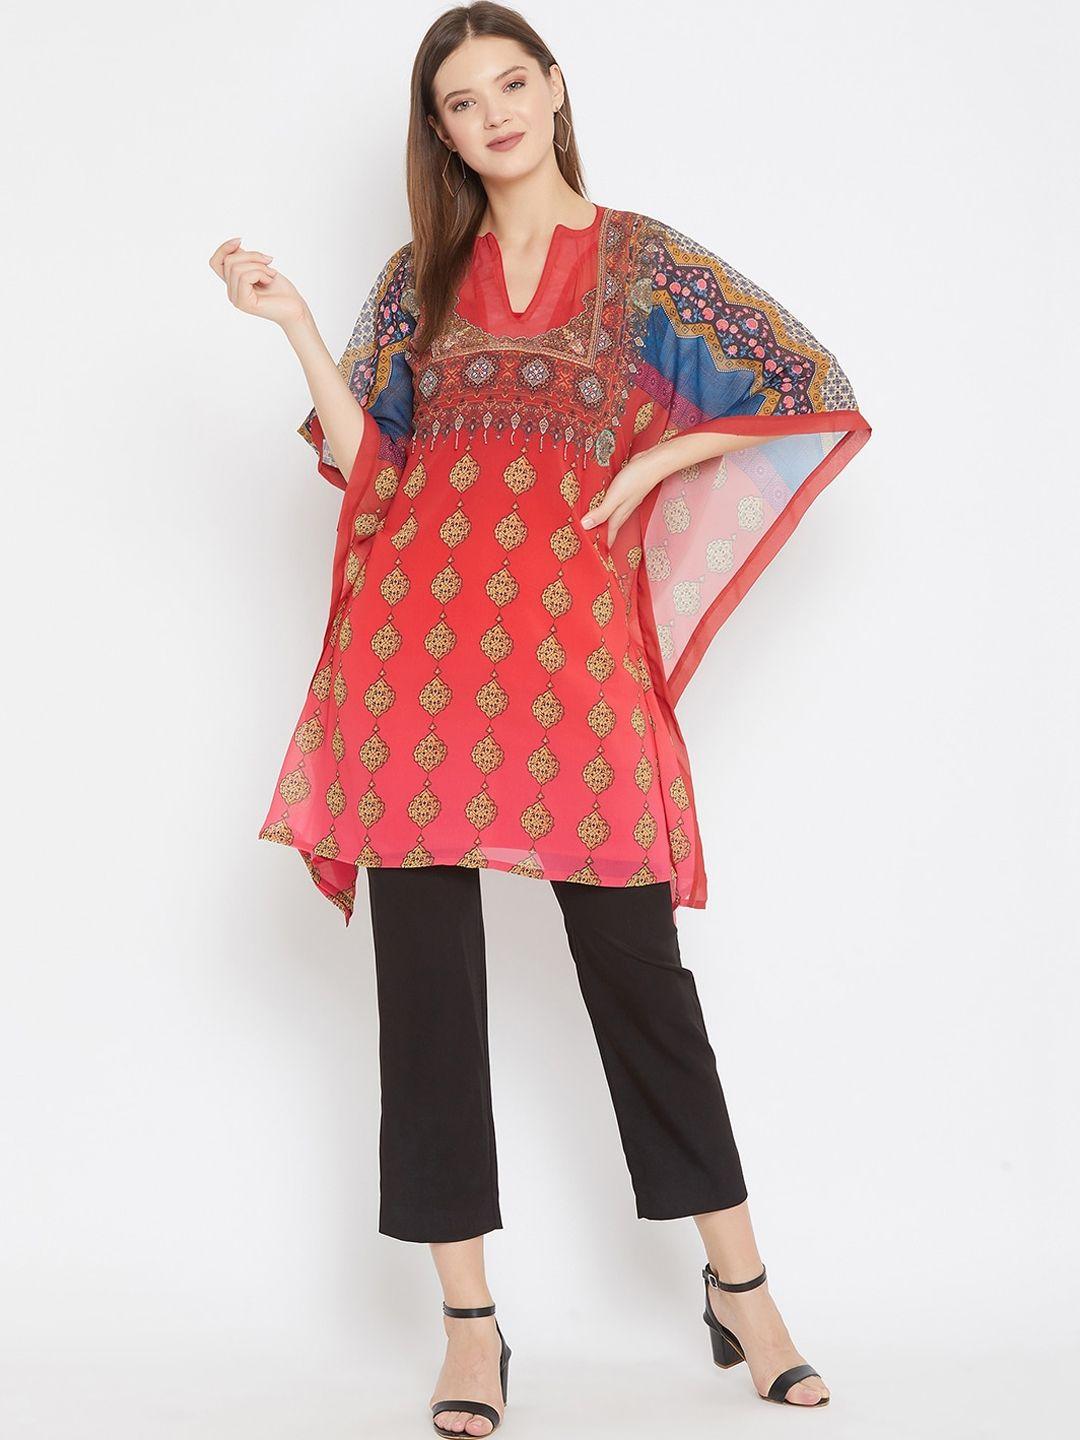 the-kaftan-company-red-hand-embroidered-layered-georgette-kaftan-longline-top